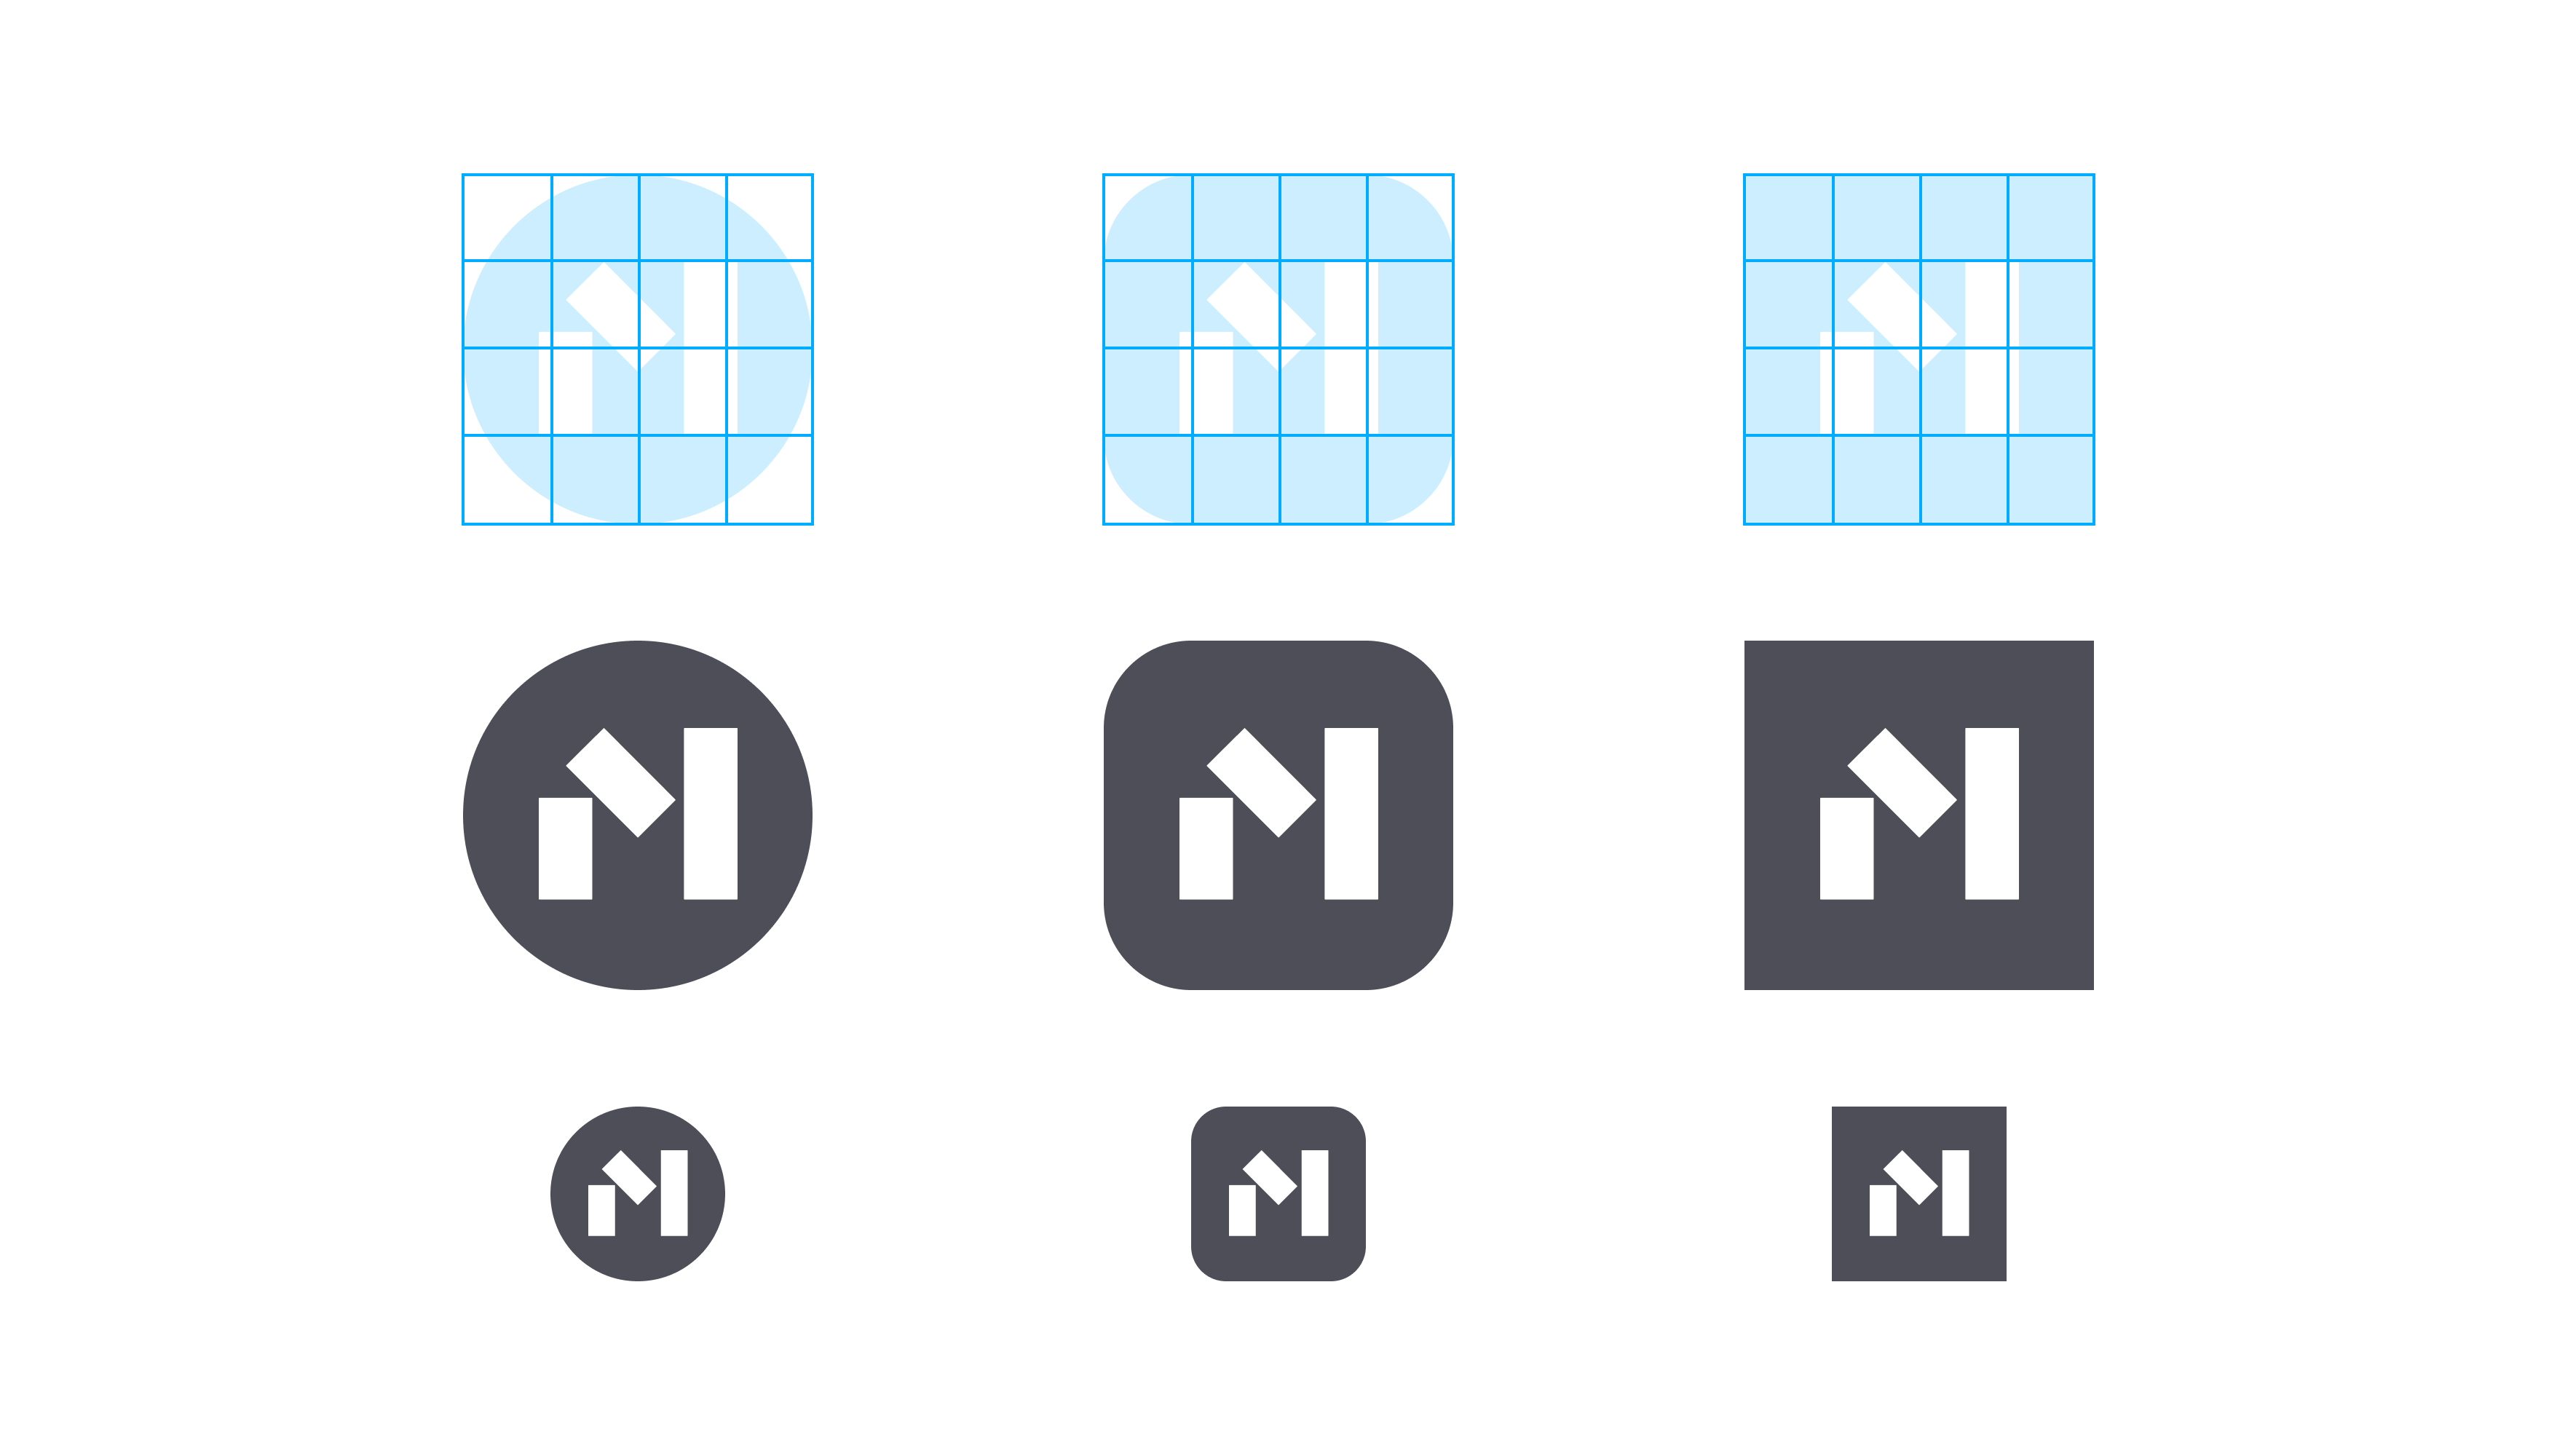 Icon shapes